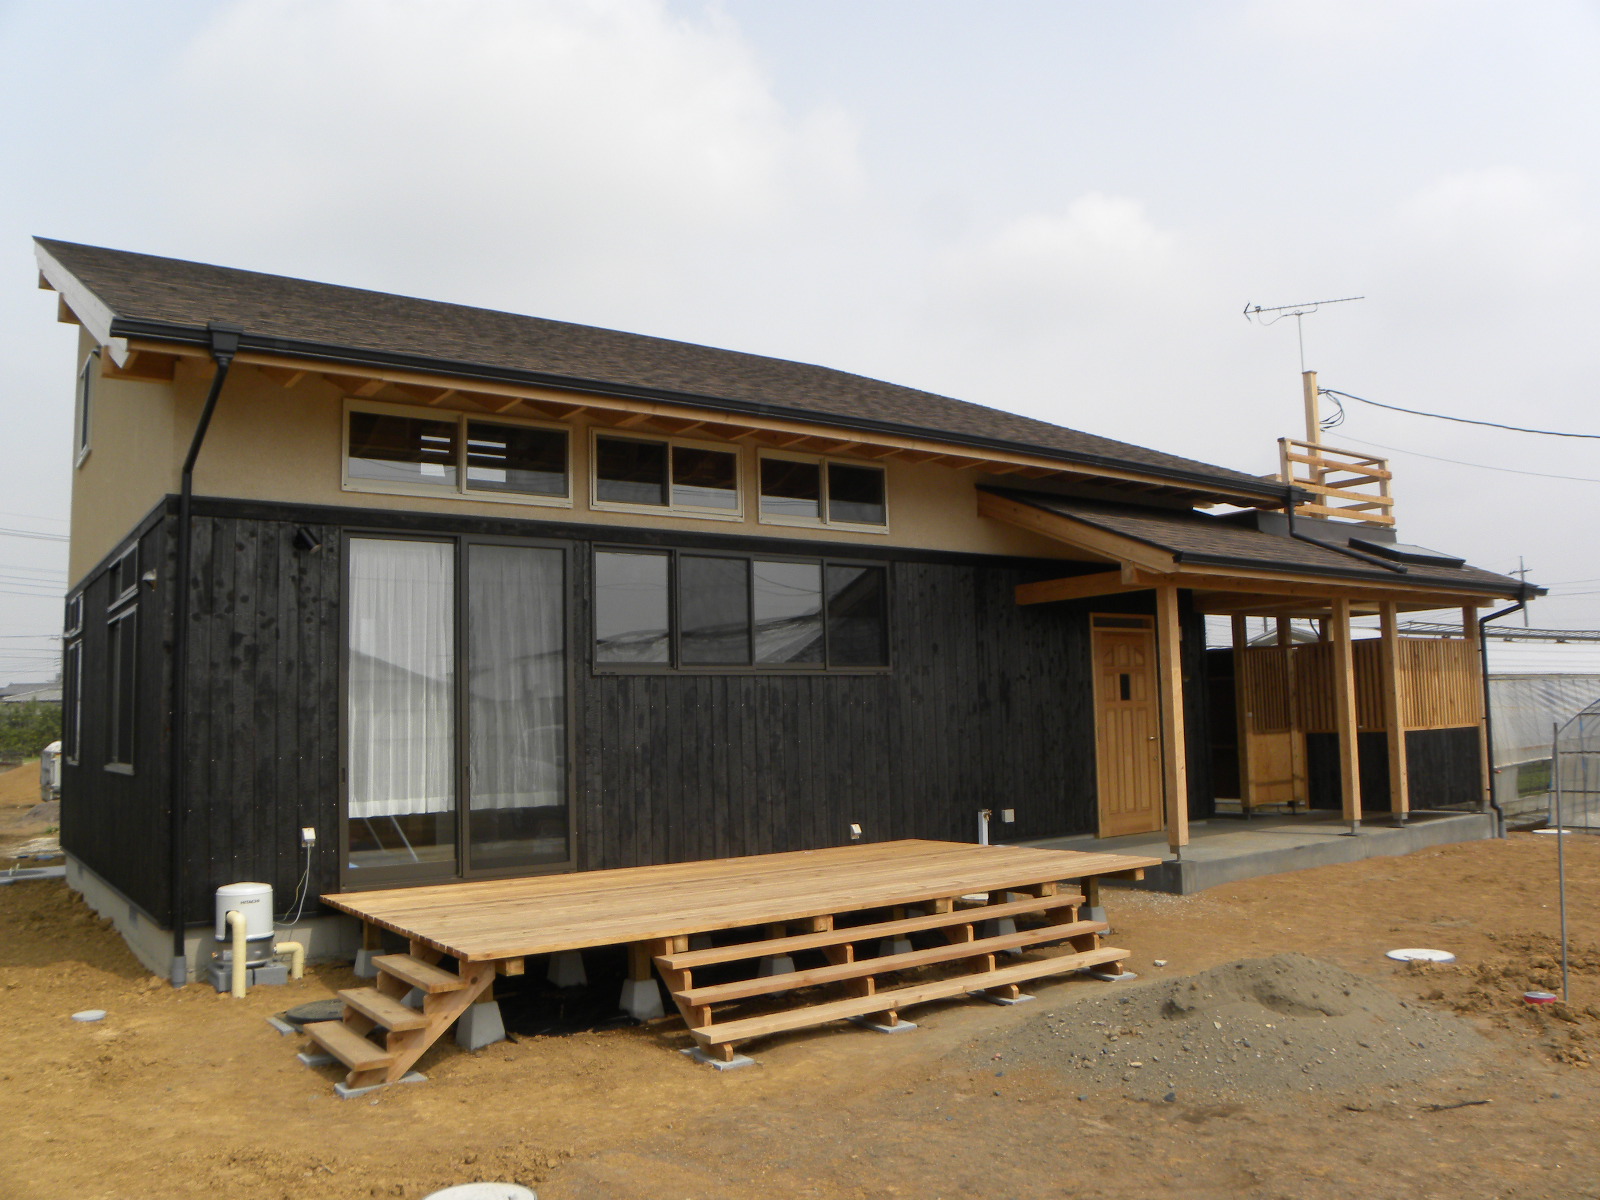 【Ouccino】企画型住宅『1．5階建て住宅』の紹介です｜建築家・市川 均さんのブログ